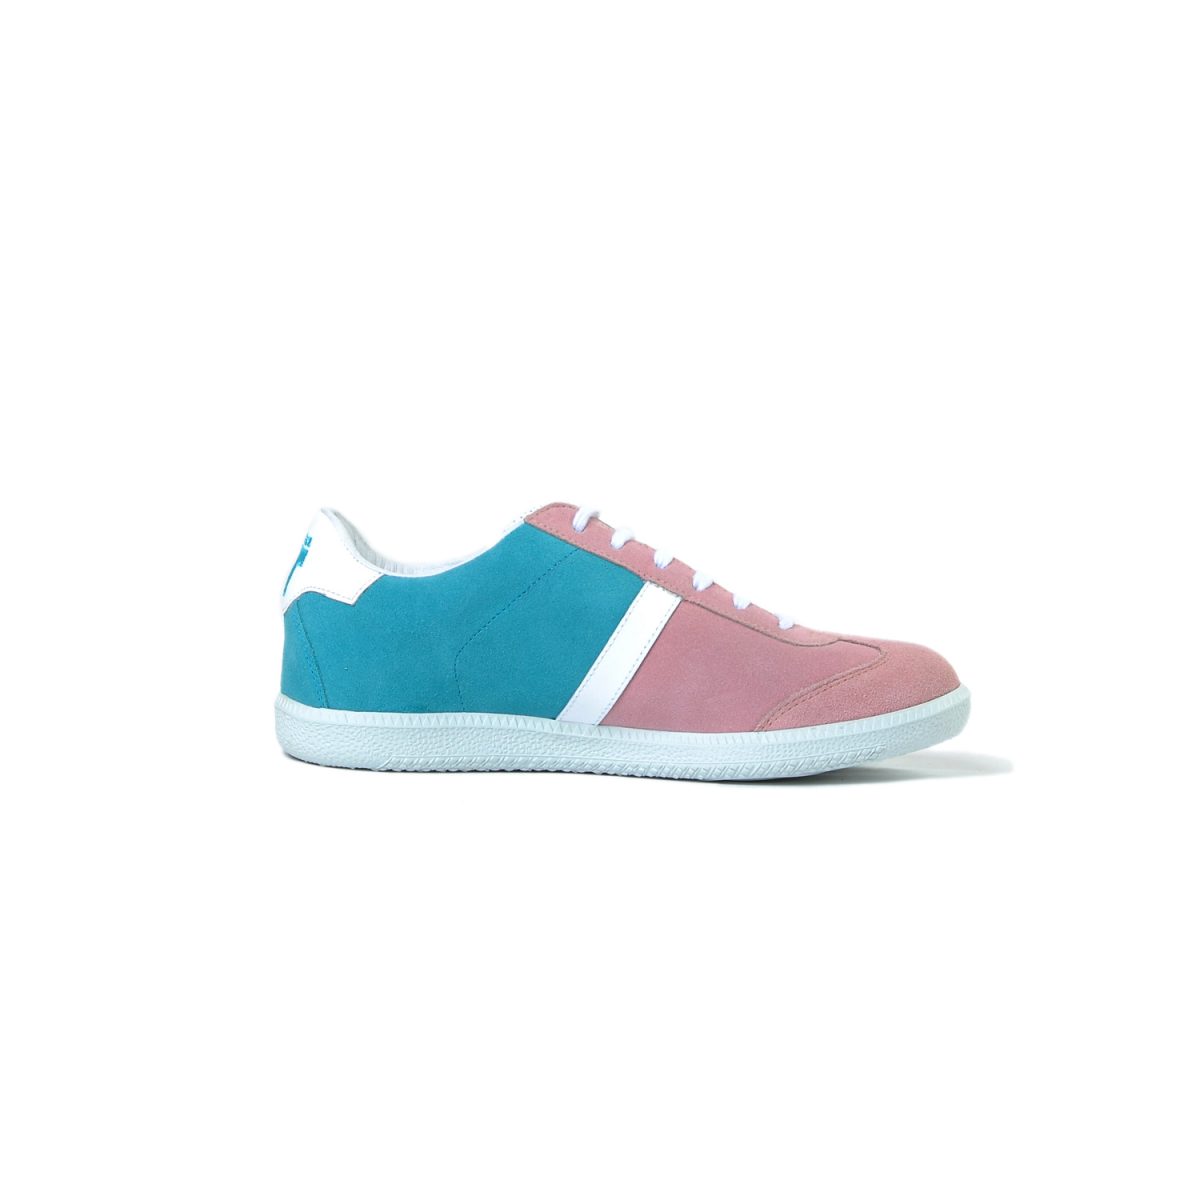 Tisza shoes - Comfort - Candy floss